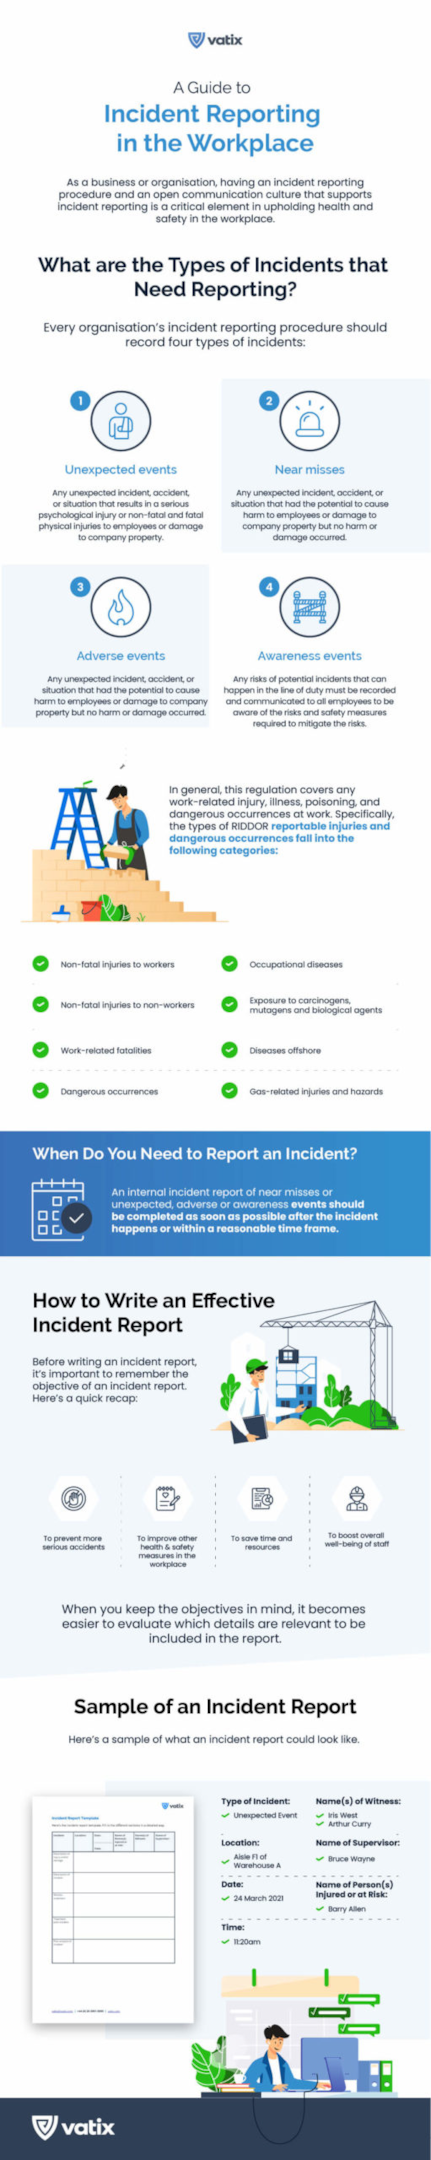 incident reporting infographic